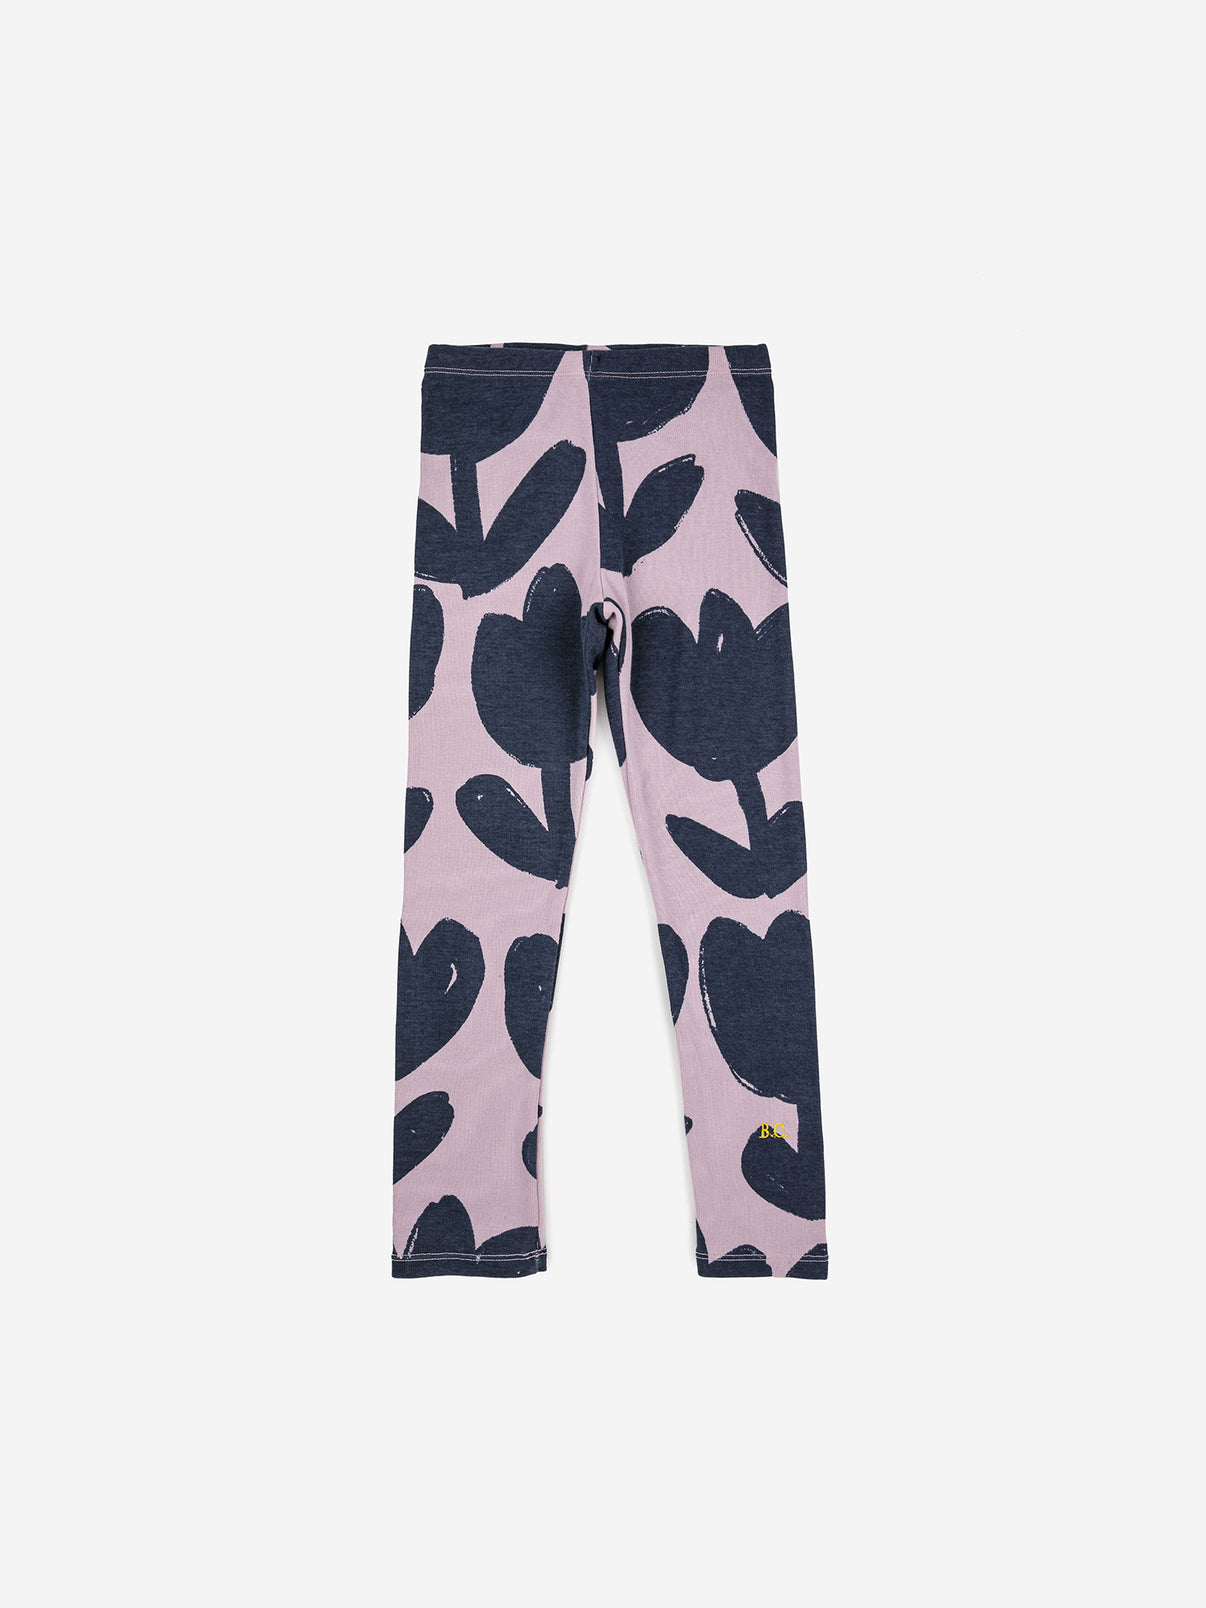 Retro Flowers Leggings by Bobo Choses. 95% organic cotton 5% elastane lavender leggings. Designed with elasticated waistband, regular and ankle length. It has a skinny fit. Made ethically and sustainably in Spain by Bobo Choses.